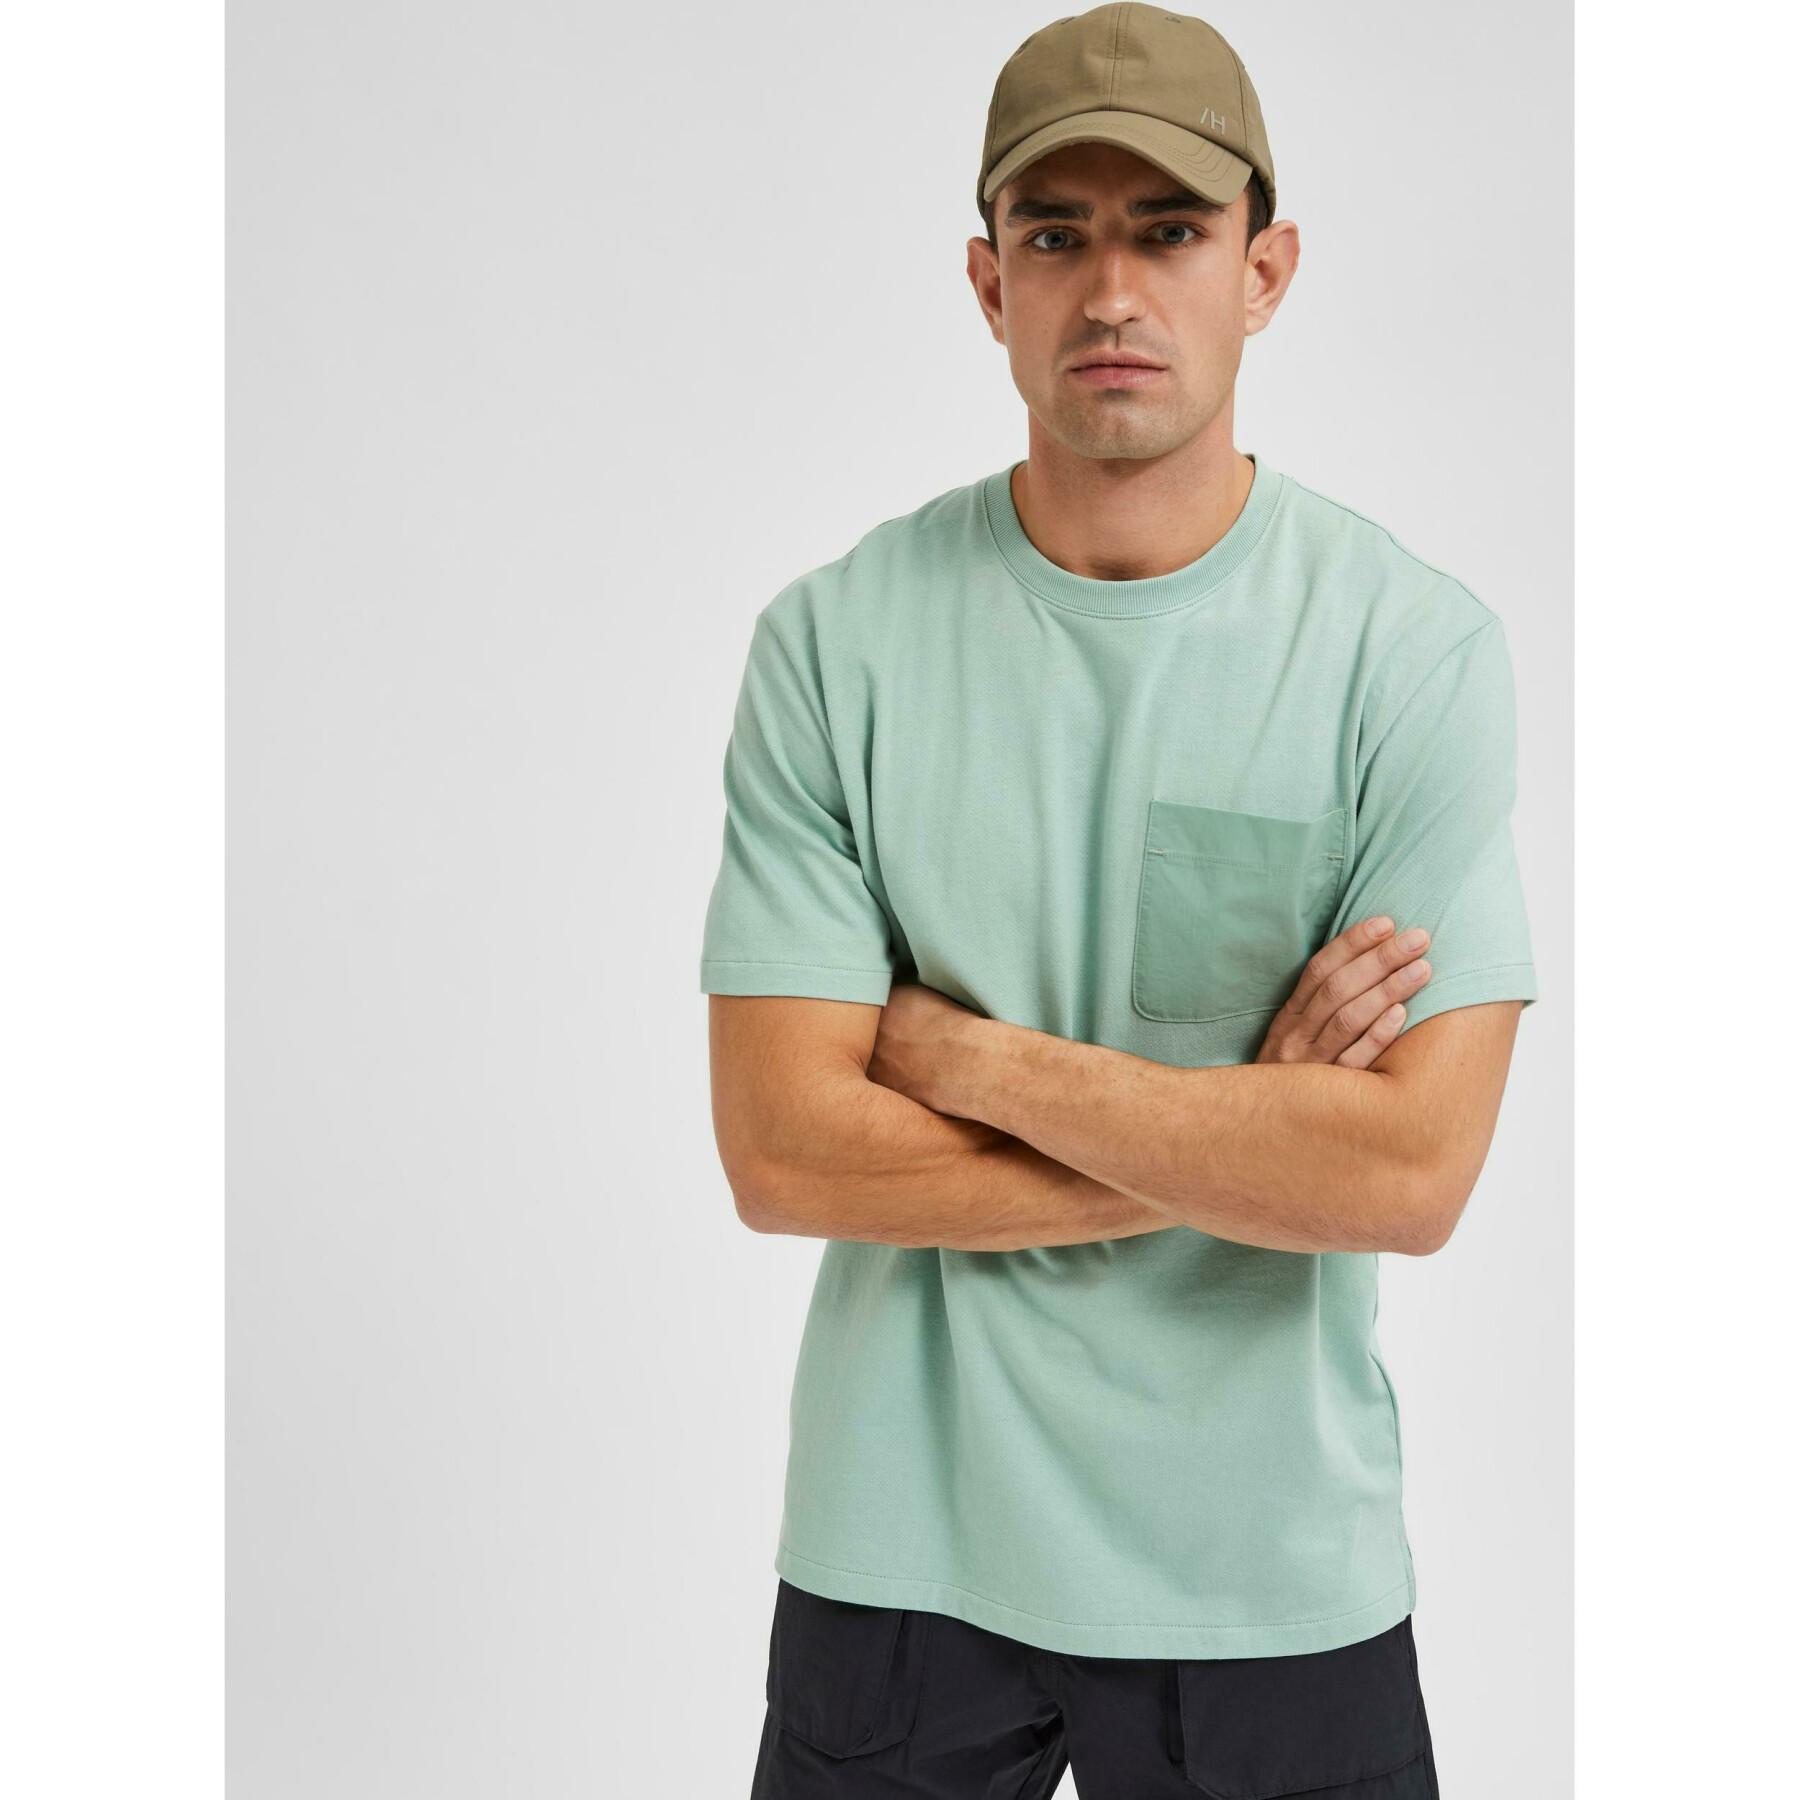 Camiseta Collar-o Selected Slhrelaxarvid